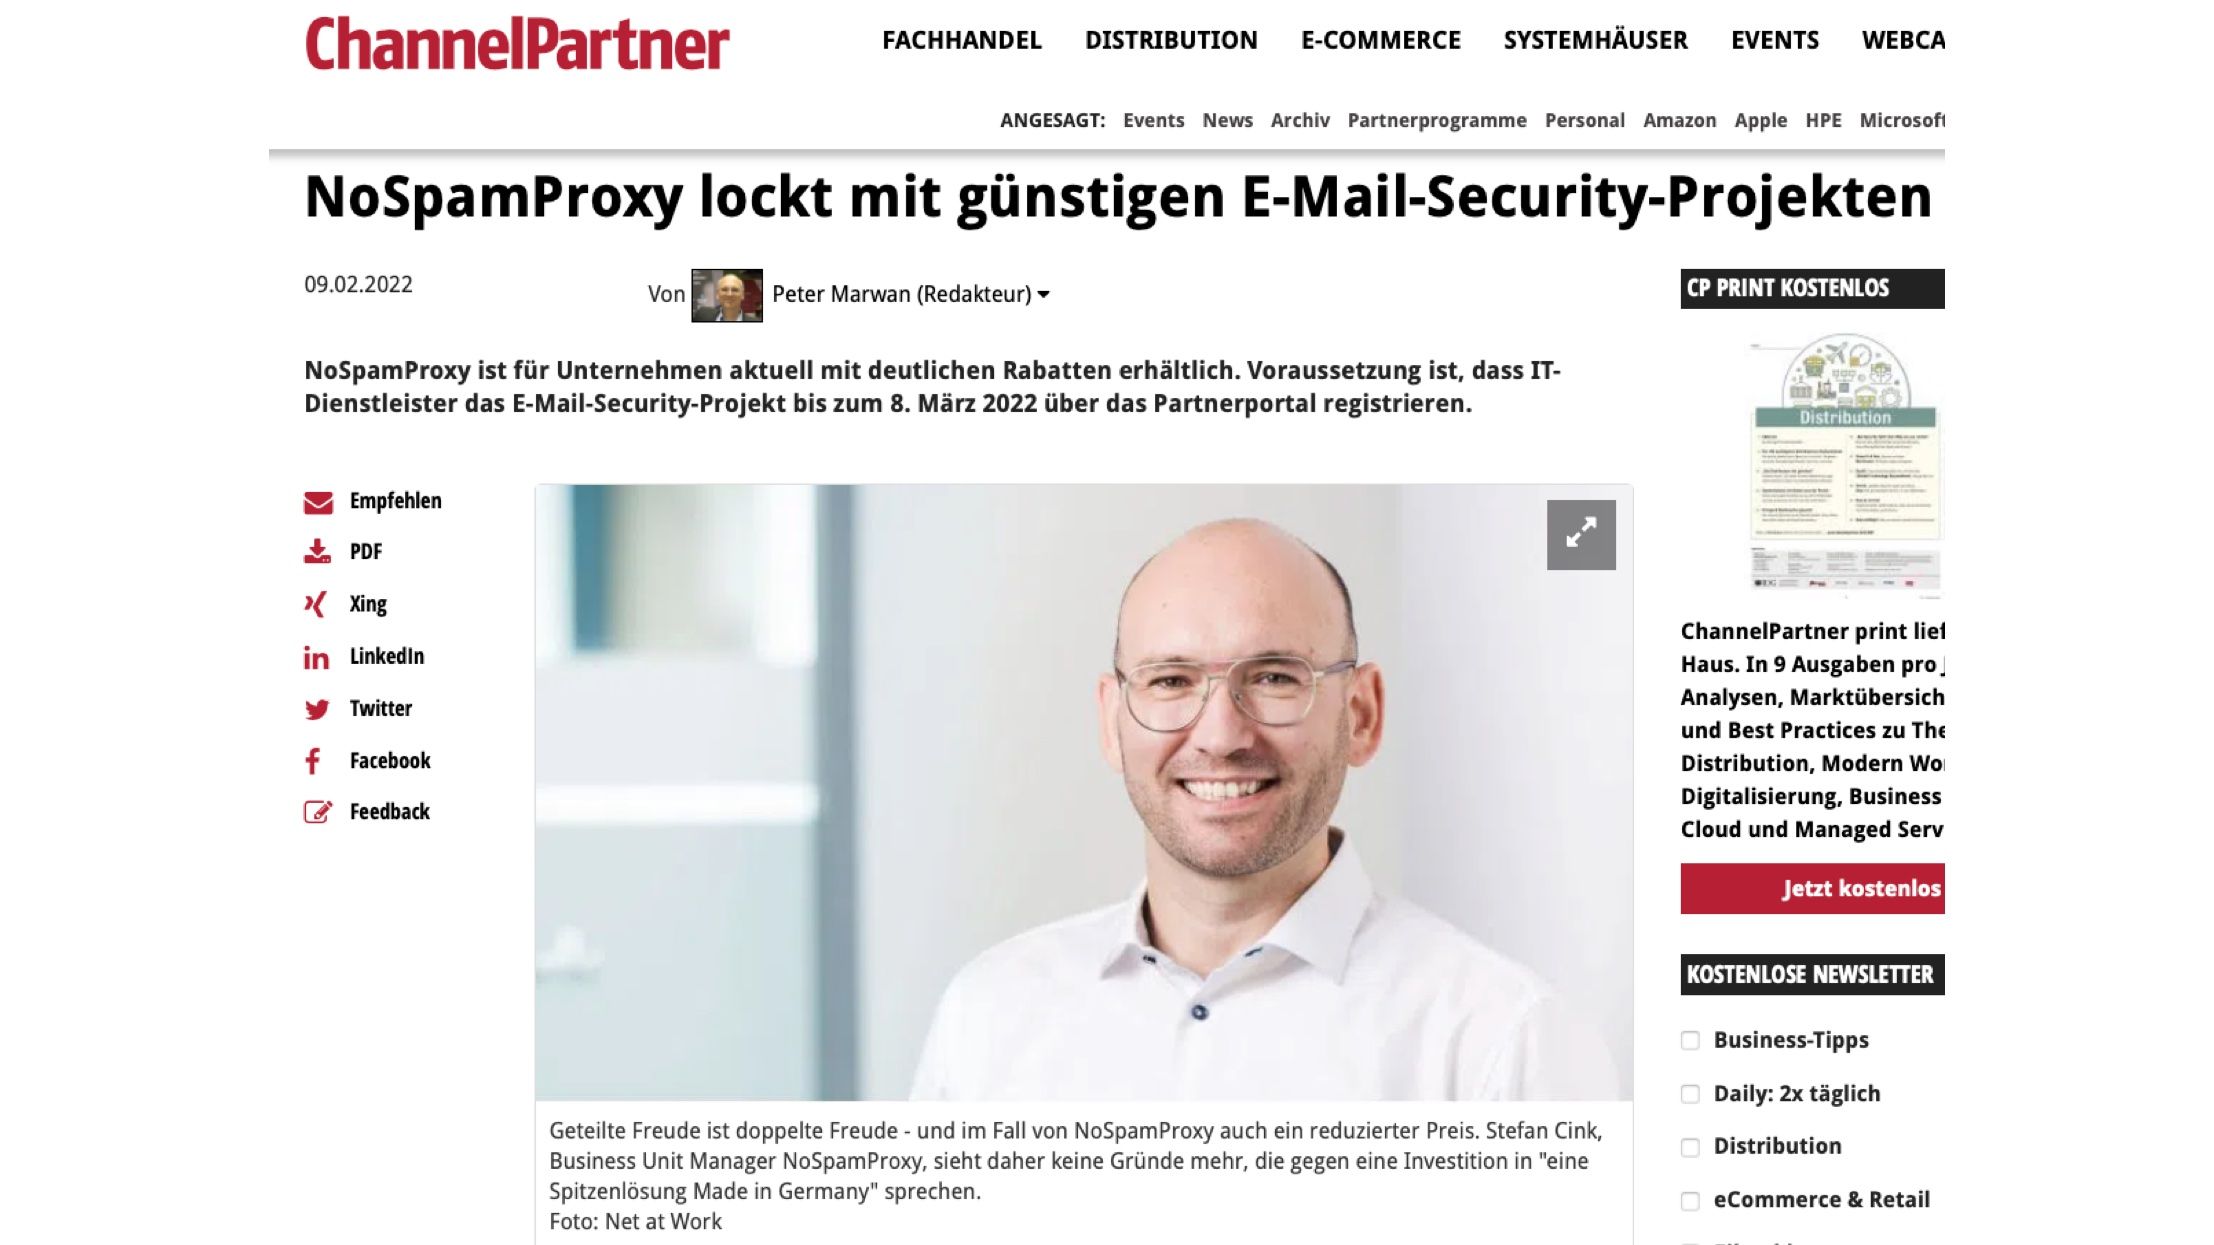 Artikel "NoSpamProxy lures with cheap email security projects" in all-about-security